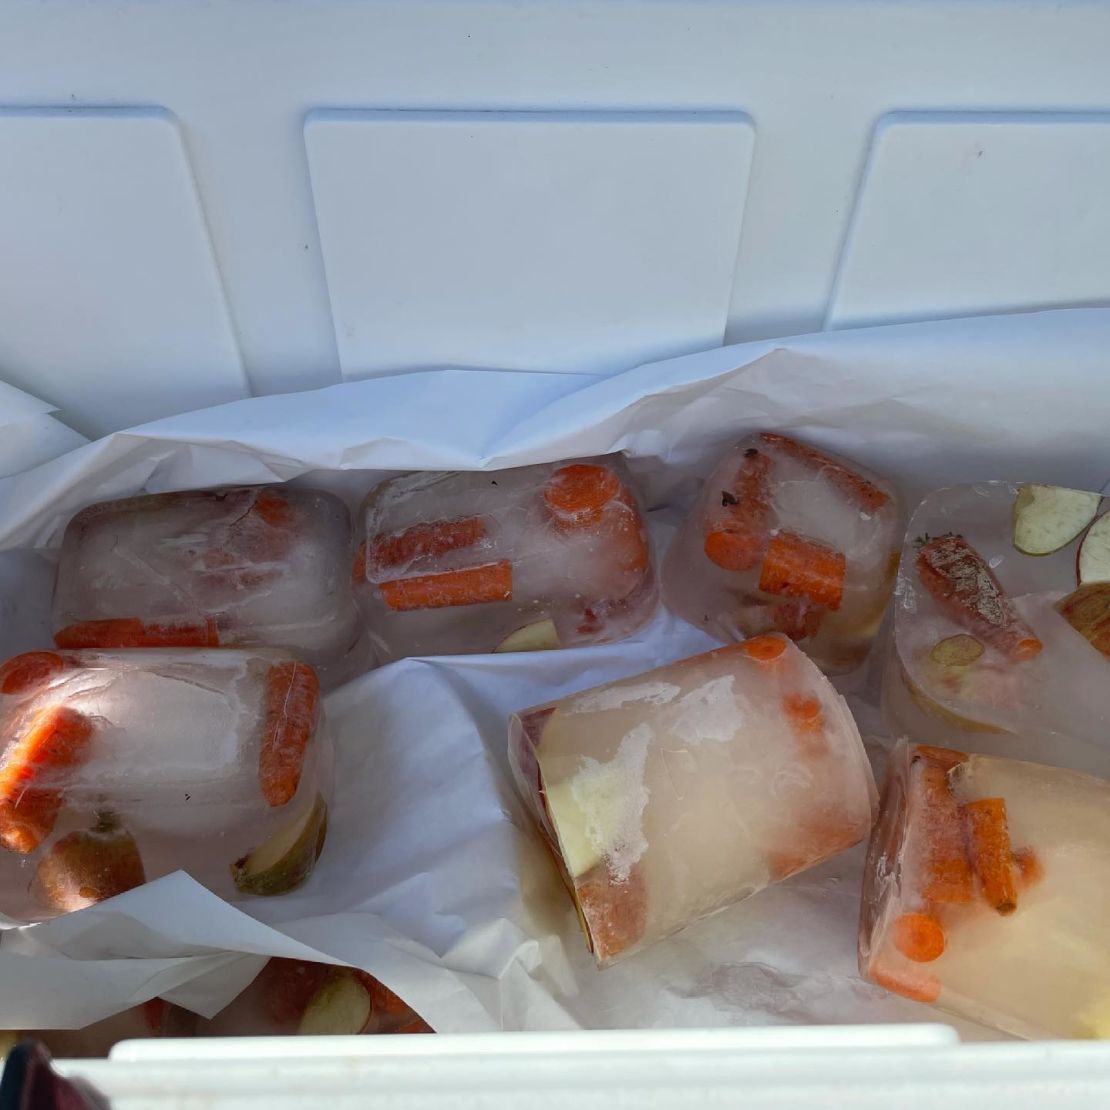 Apples and carrots frozen into ice blocks by the author to offer horses relief from the heat. 